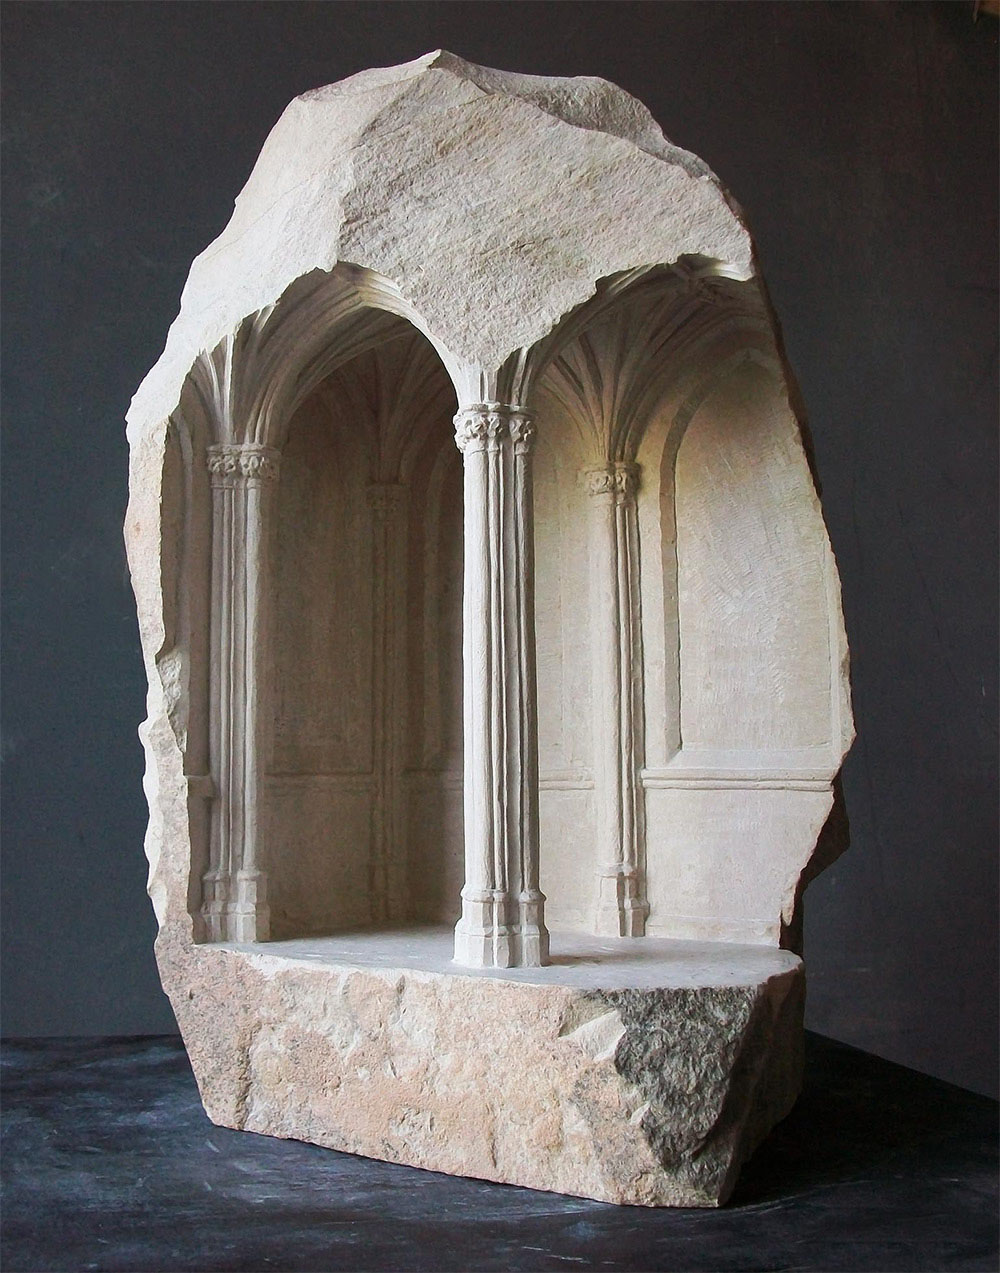 Miniature-Architecture-Carved-in-Stone-by-Matthew-Simmonds-3